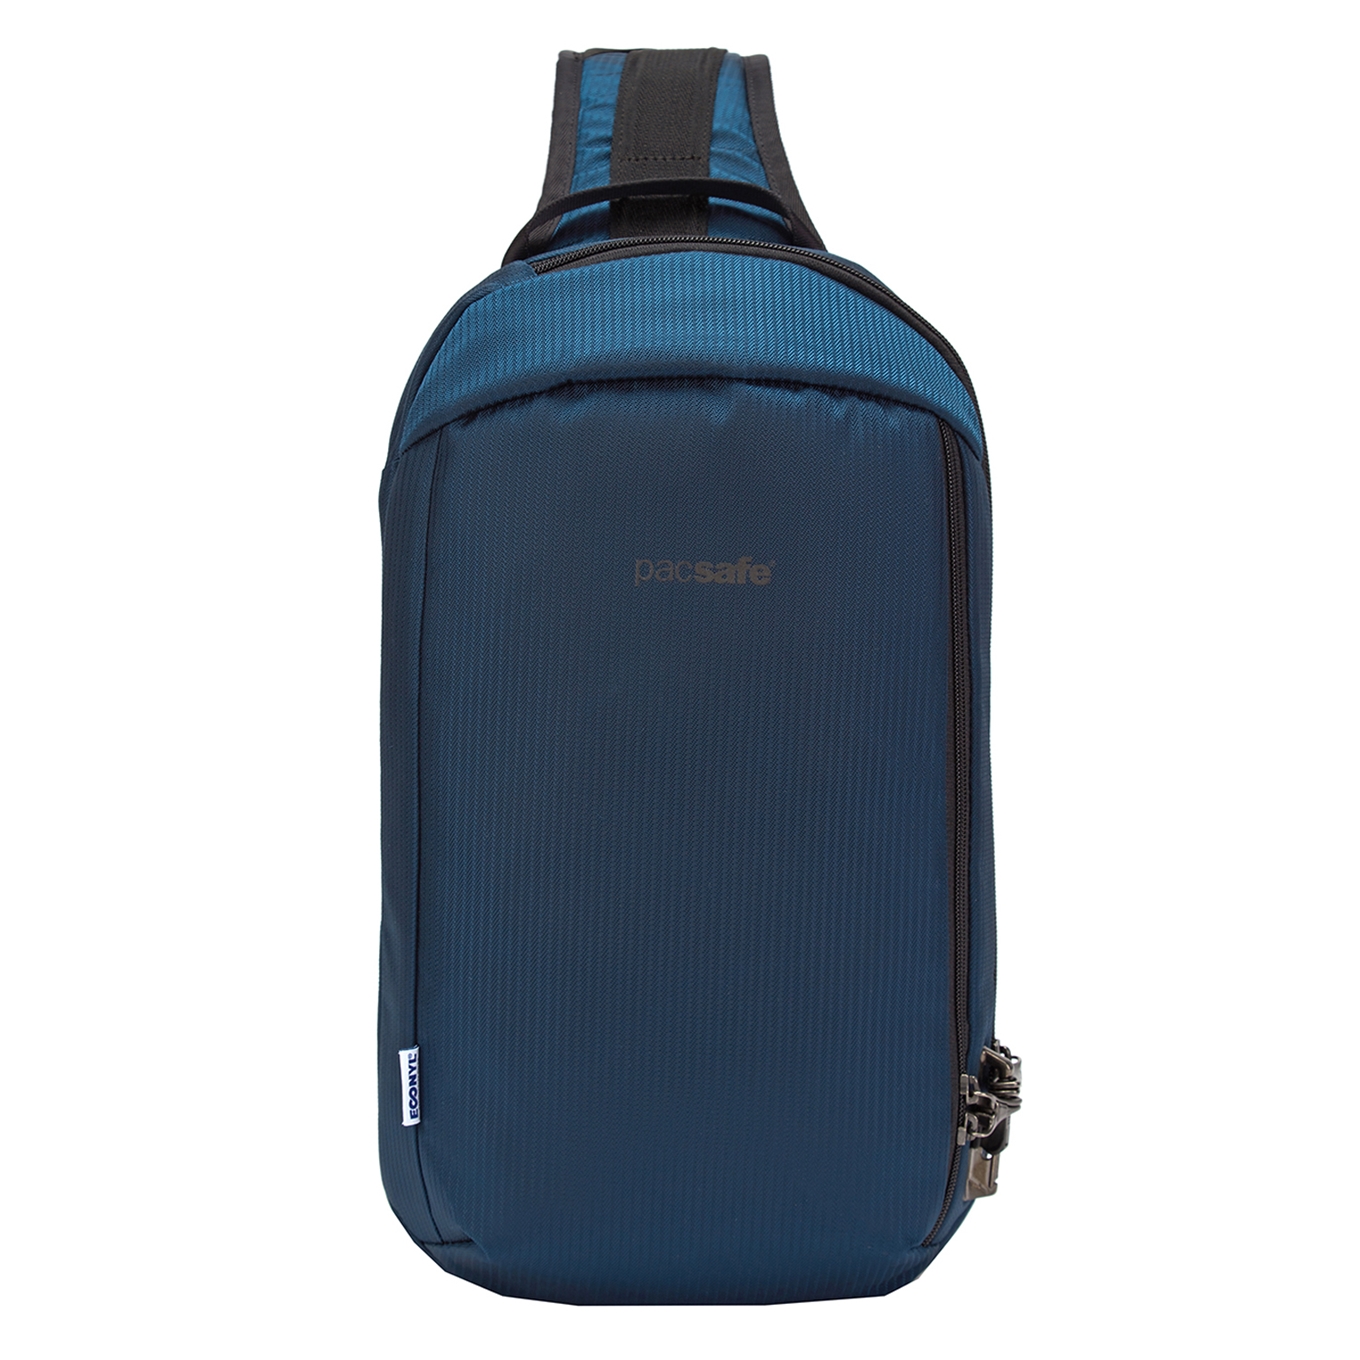 Pacsafe Vibe 325 Anti-Theft Sling Pack Econyl ocean backpack